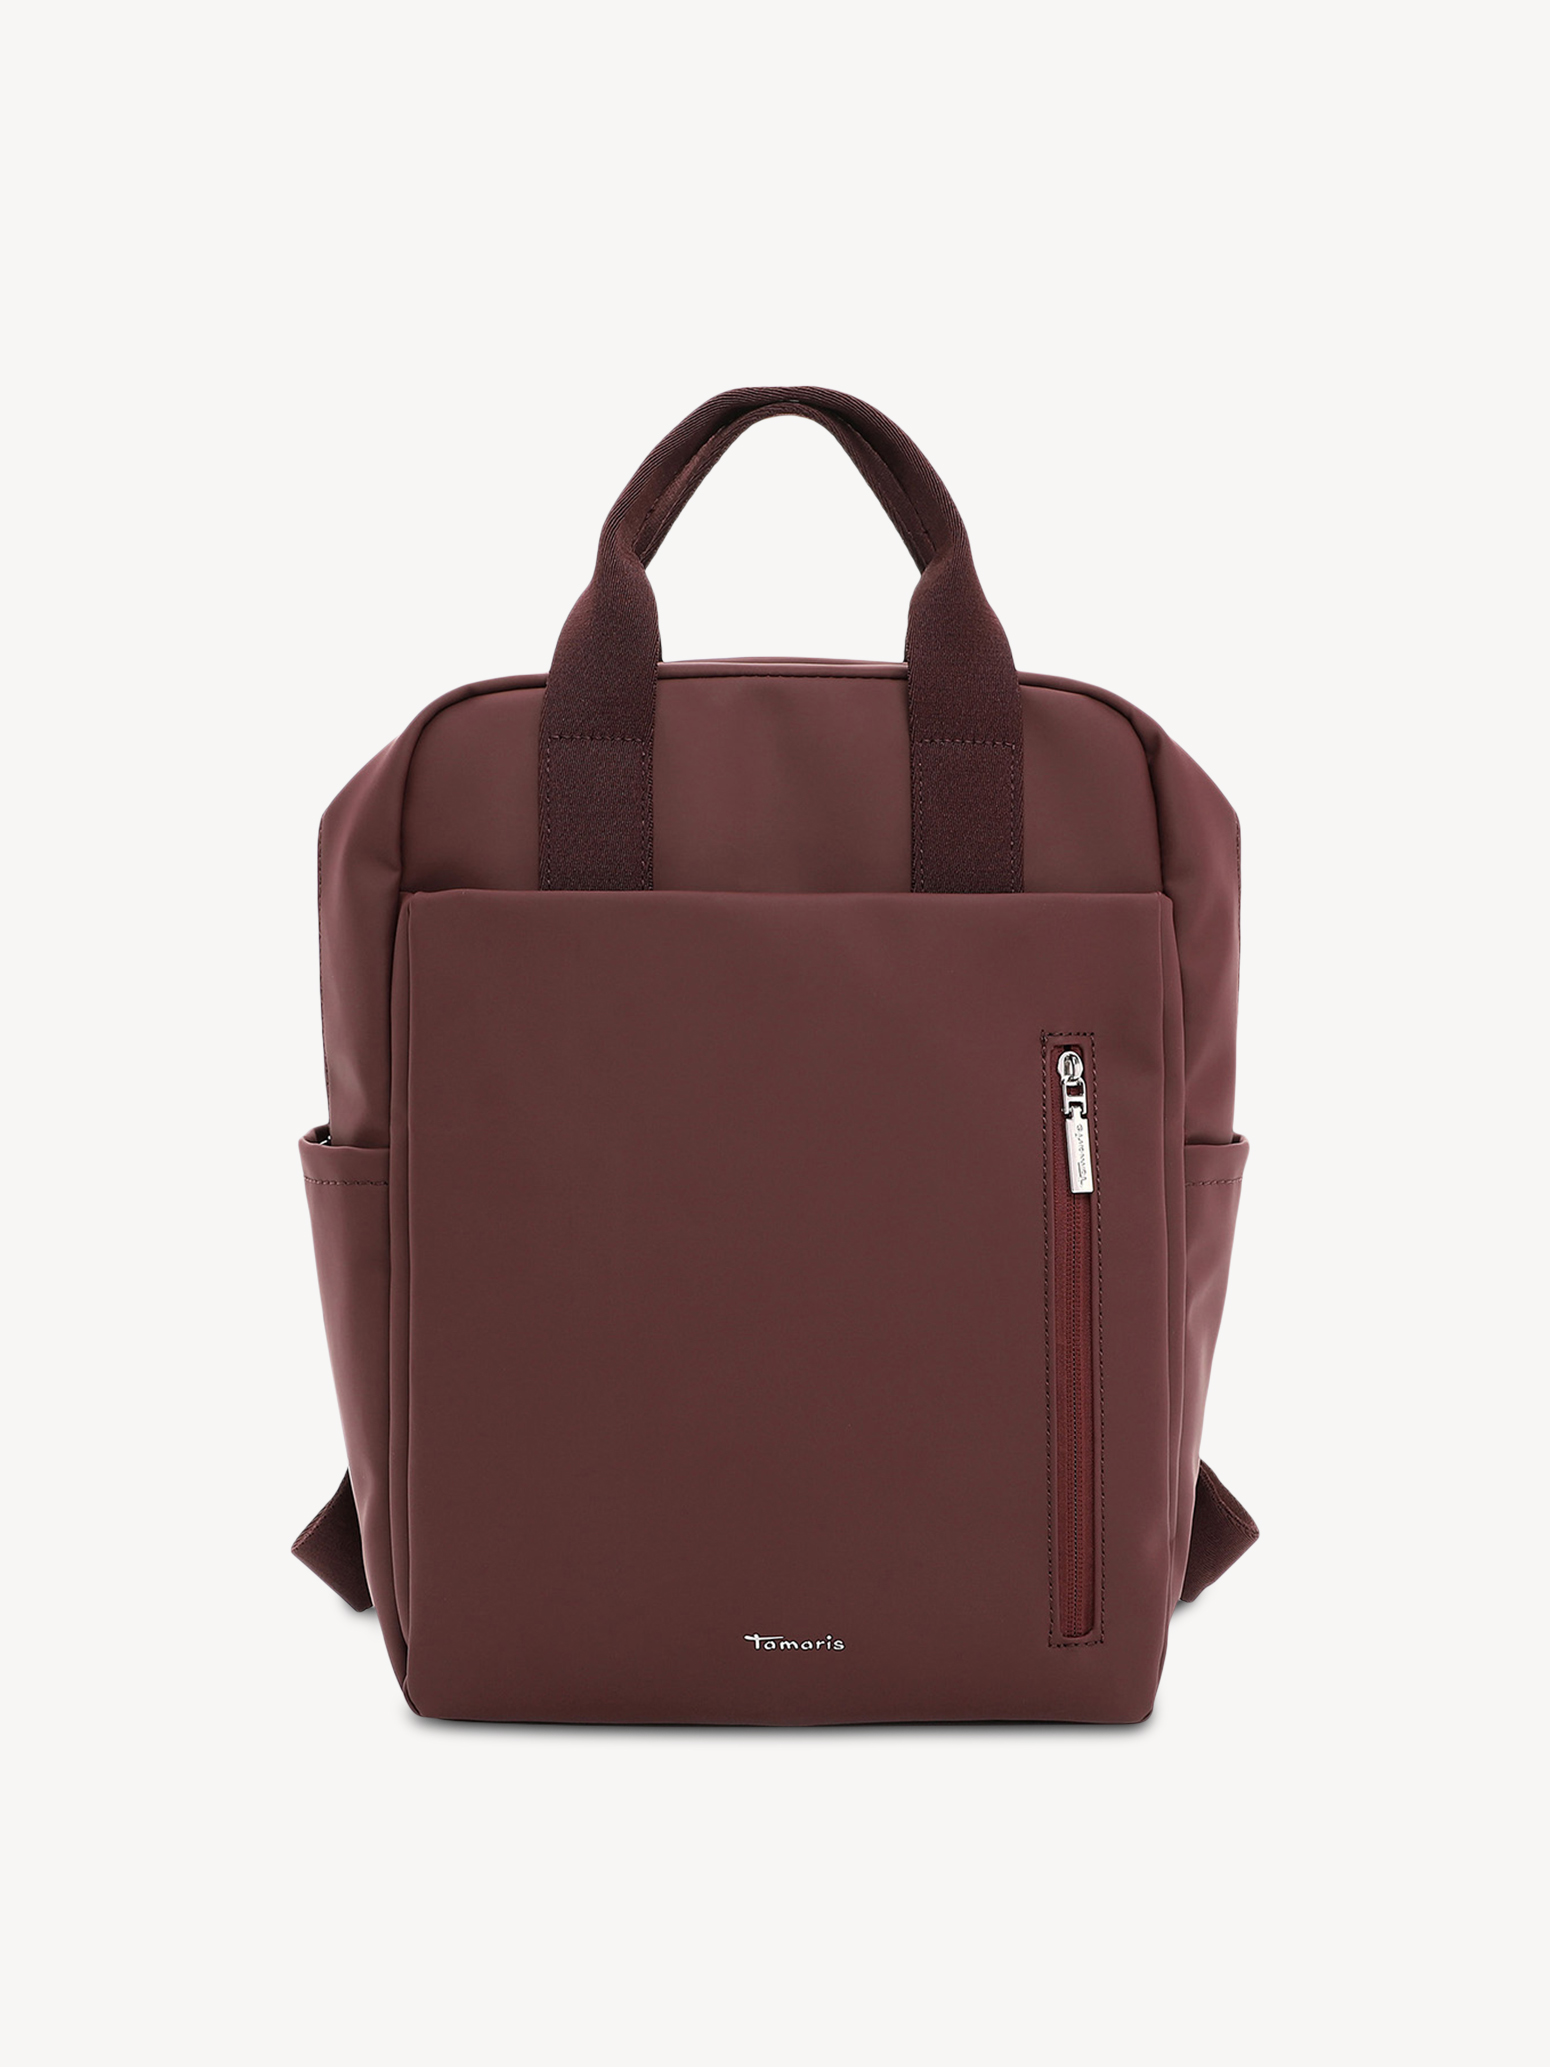 Backpack - red